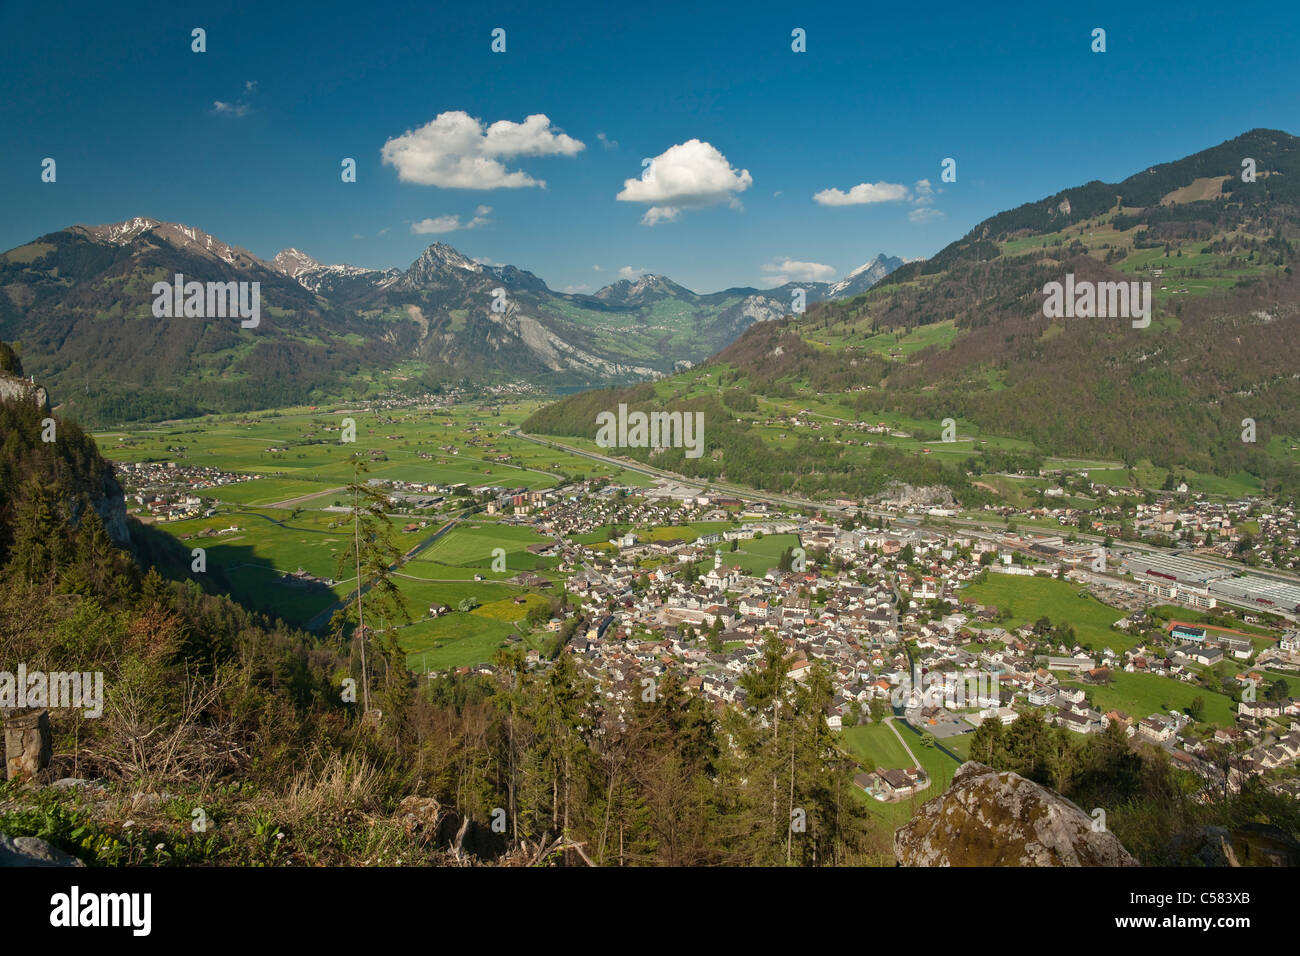 Nafels, canton Glarus, Switzerland, panorama, Alps, Linthal, scenery, town scenery, mountains, skies, outdoors, outside, Stock Photo